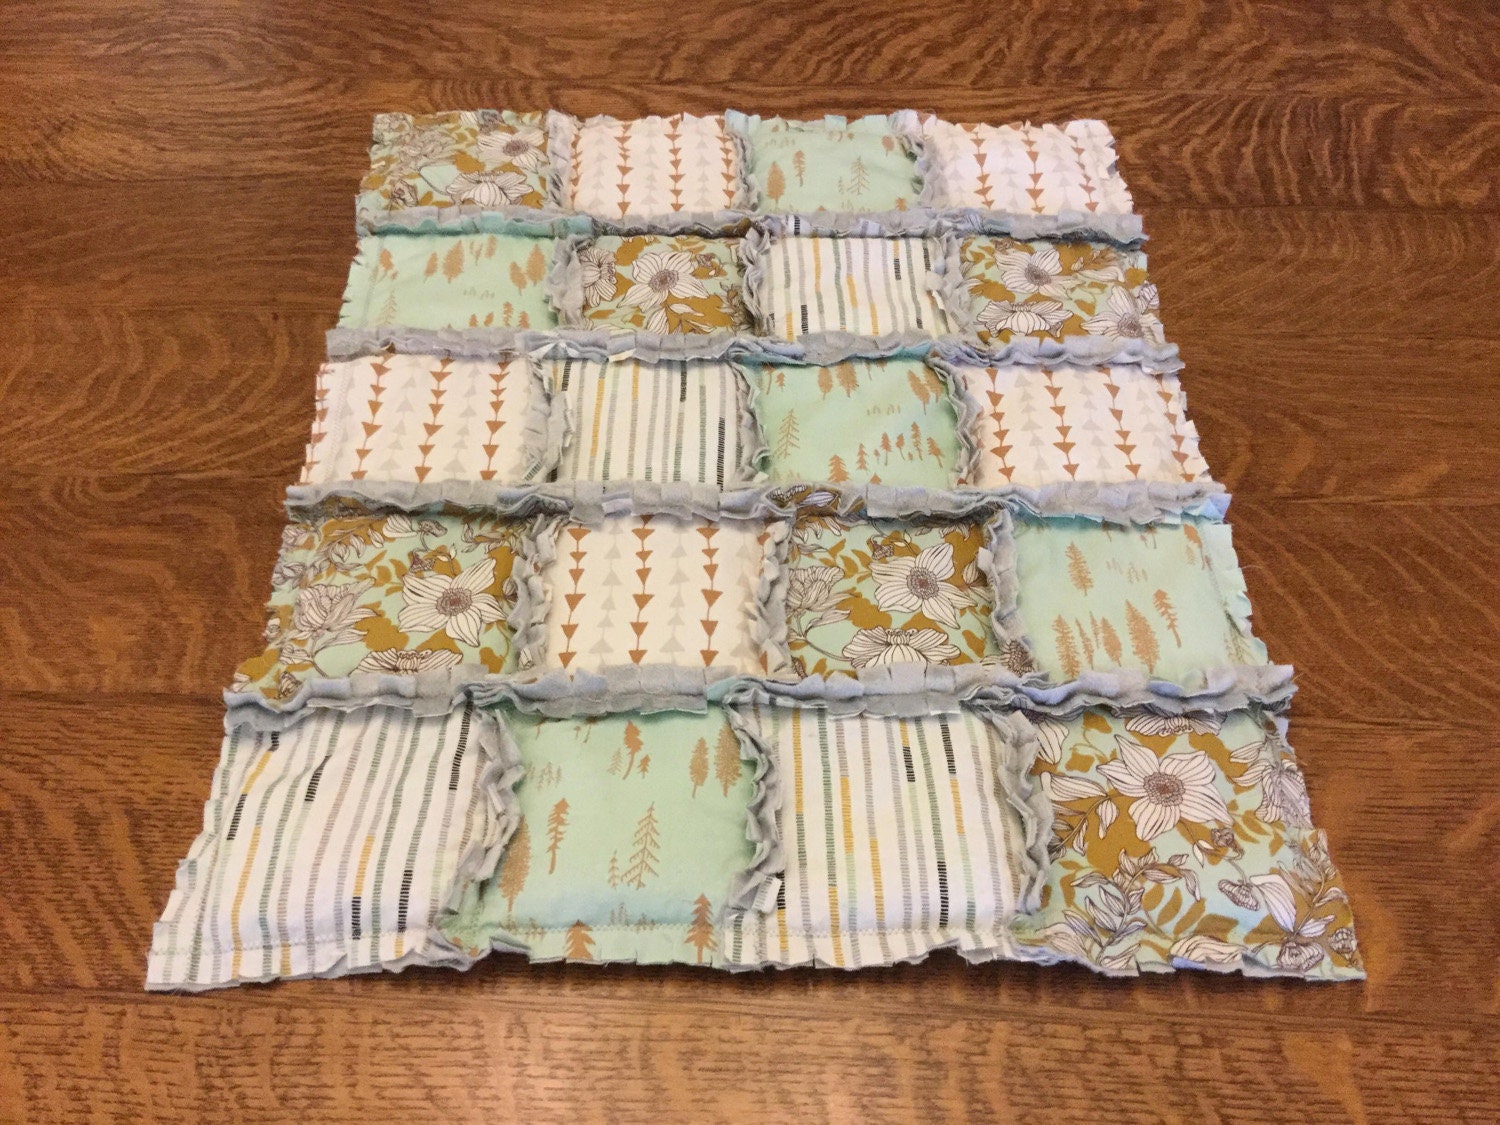 Woodland Mint Weighted Lap Pad, Adult Weighted Lap Blanket, Anxiety